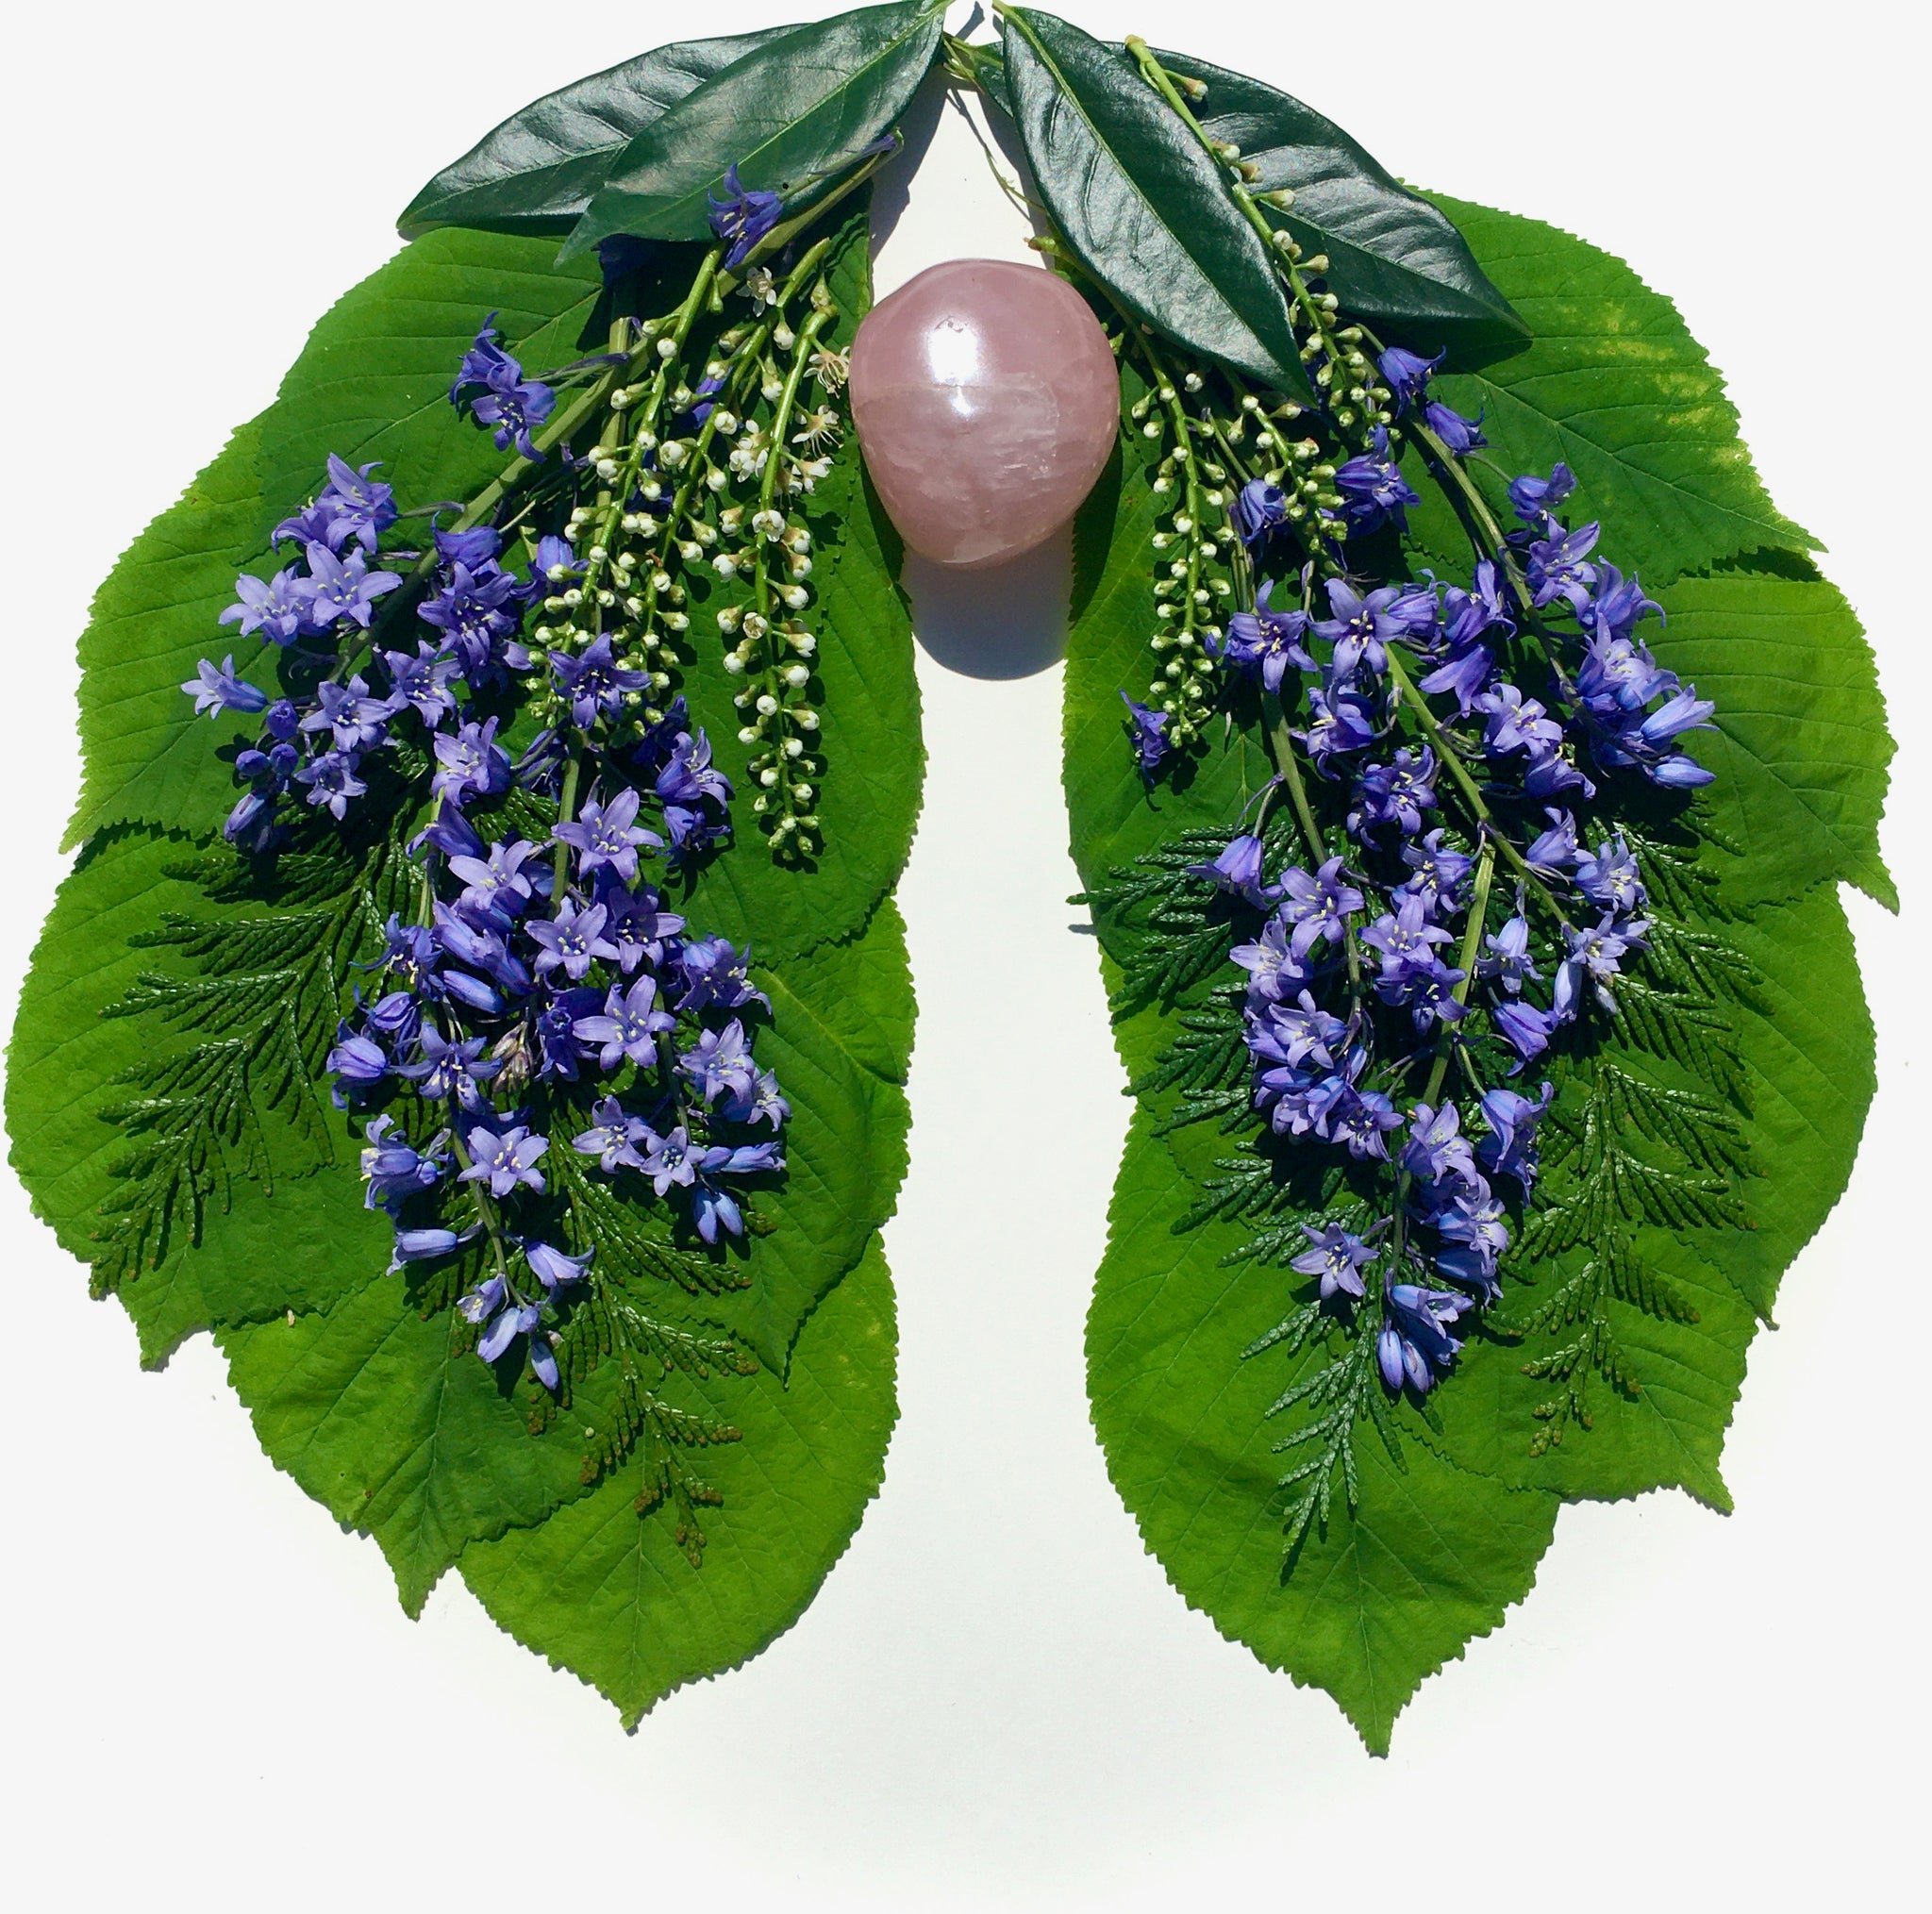 Bluebells and Cherry Laurel layer over green leaves in two matching shapes like lungs. Between the lungs a  large rose quartz crystal sits where the heart would be.